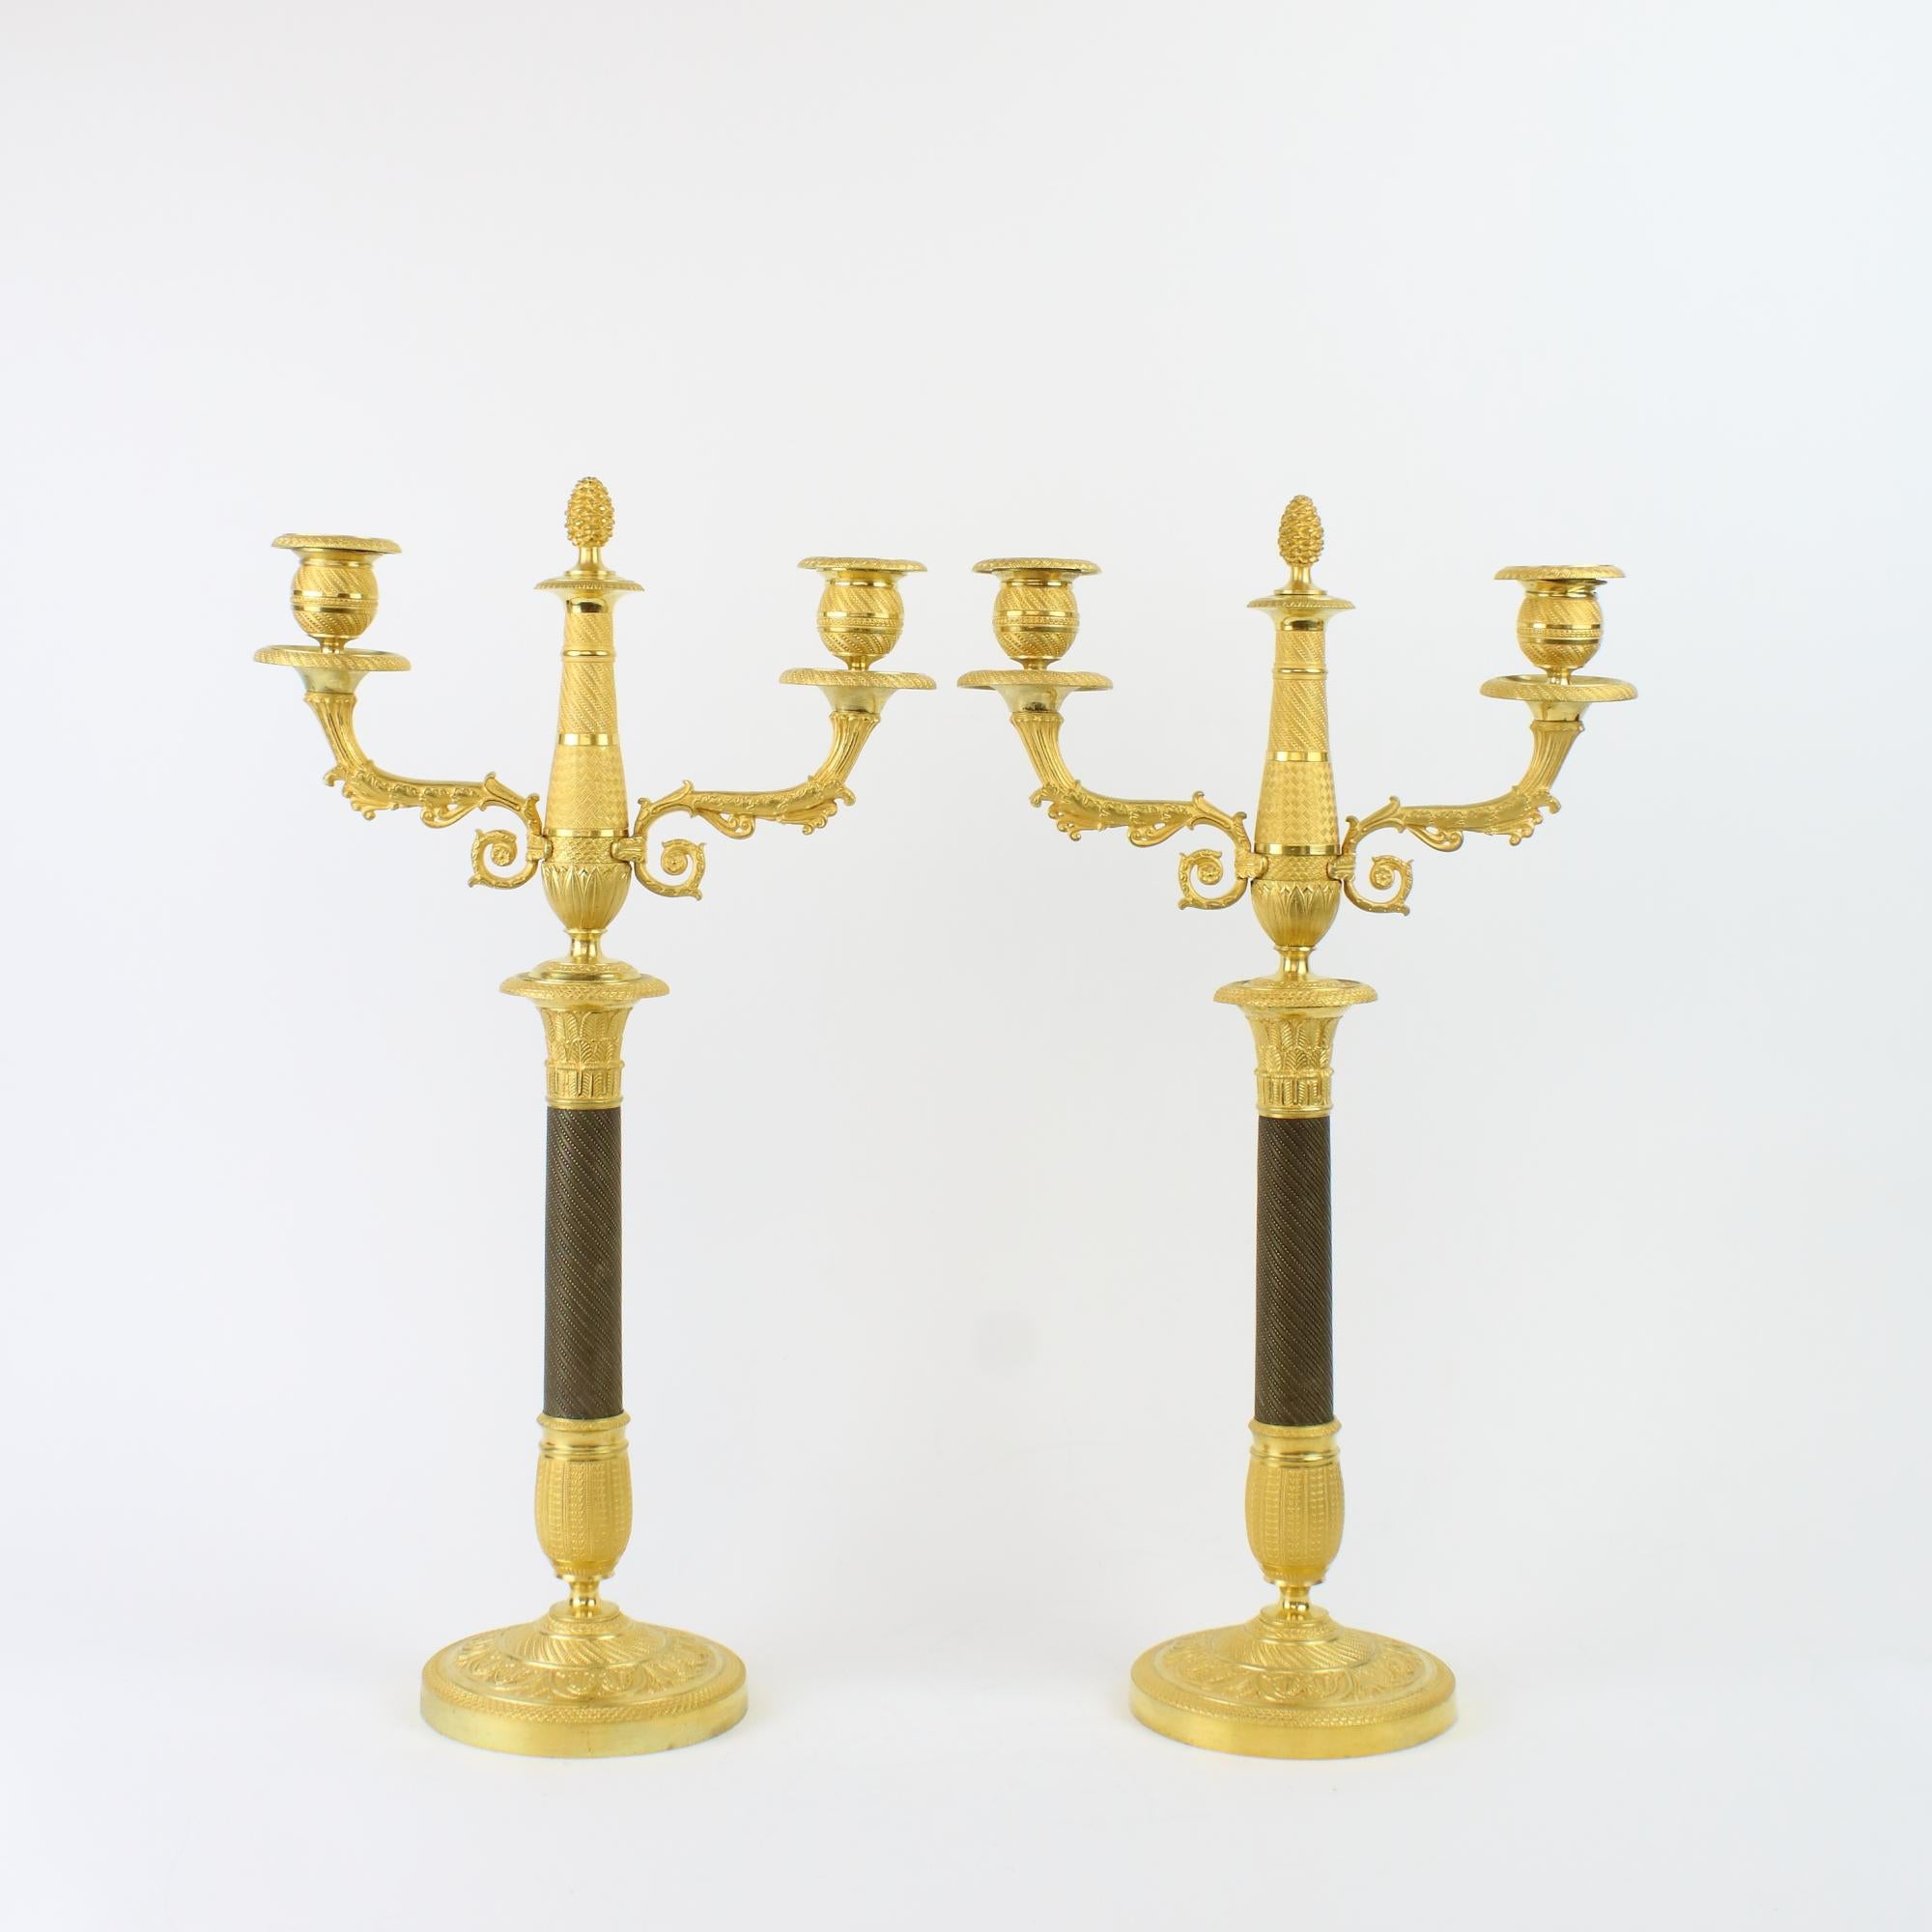 Early 19th Century Pair of French Empire One-/Two-Light Patinated and Gilt Bronze Candelabra